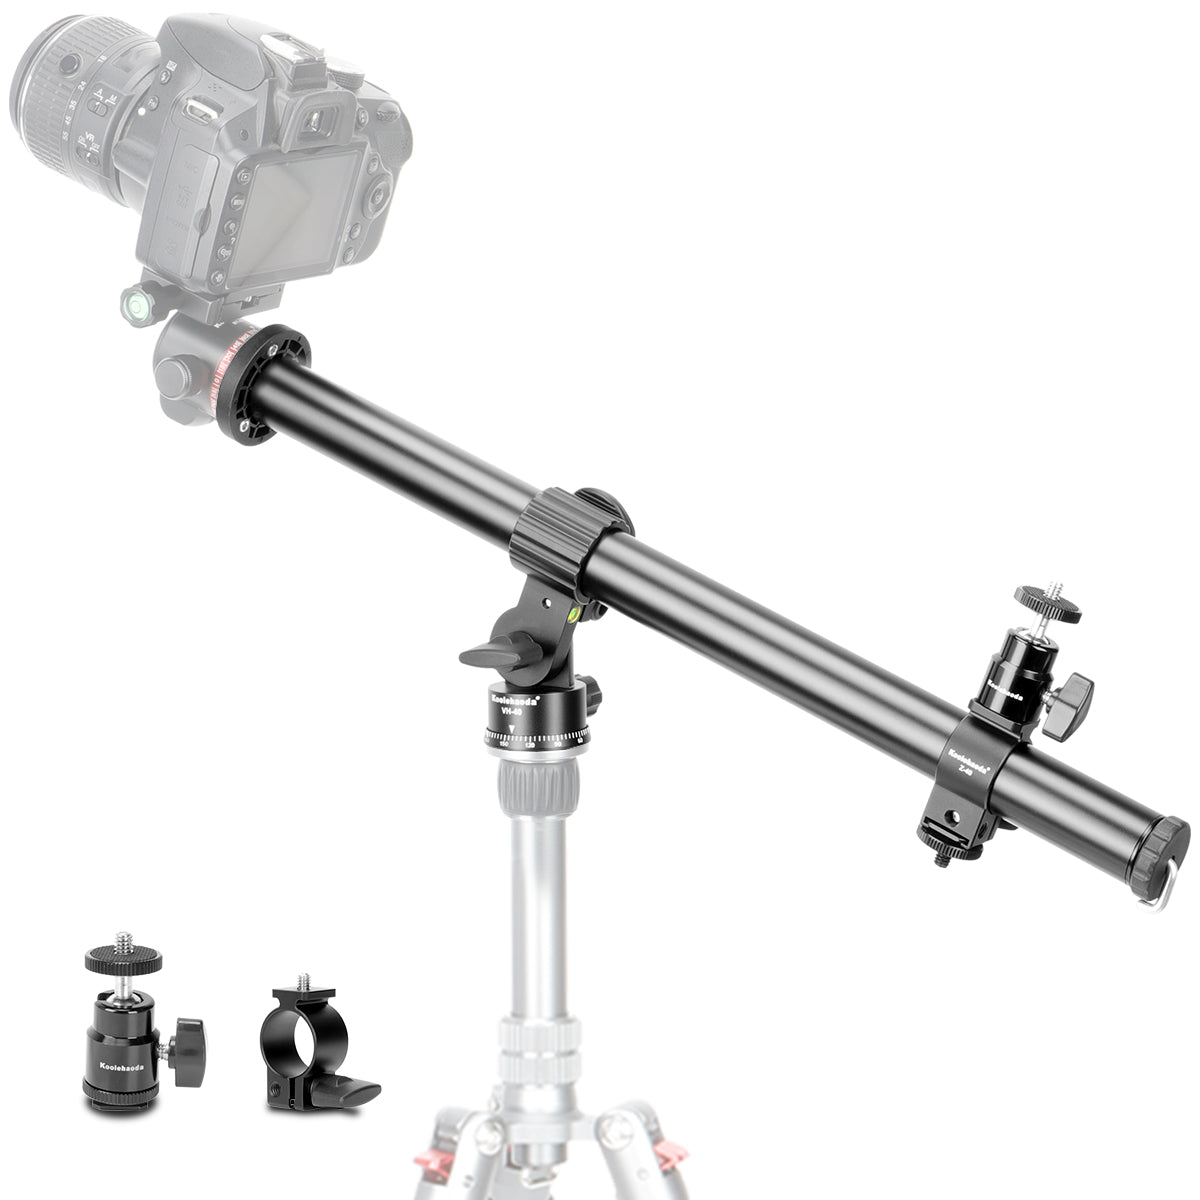 Tripod Extension Arm,16.5" Horizontal Center Column Tripod Extension Arm 360° Rotatable Rotating Base for Overhead Photography, Macro and Low-Angle Shooting, Load up to 22lbs/10kg - (VH-40)